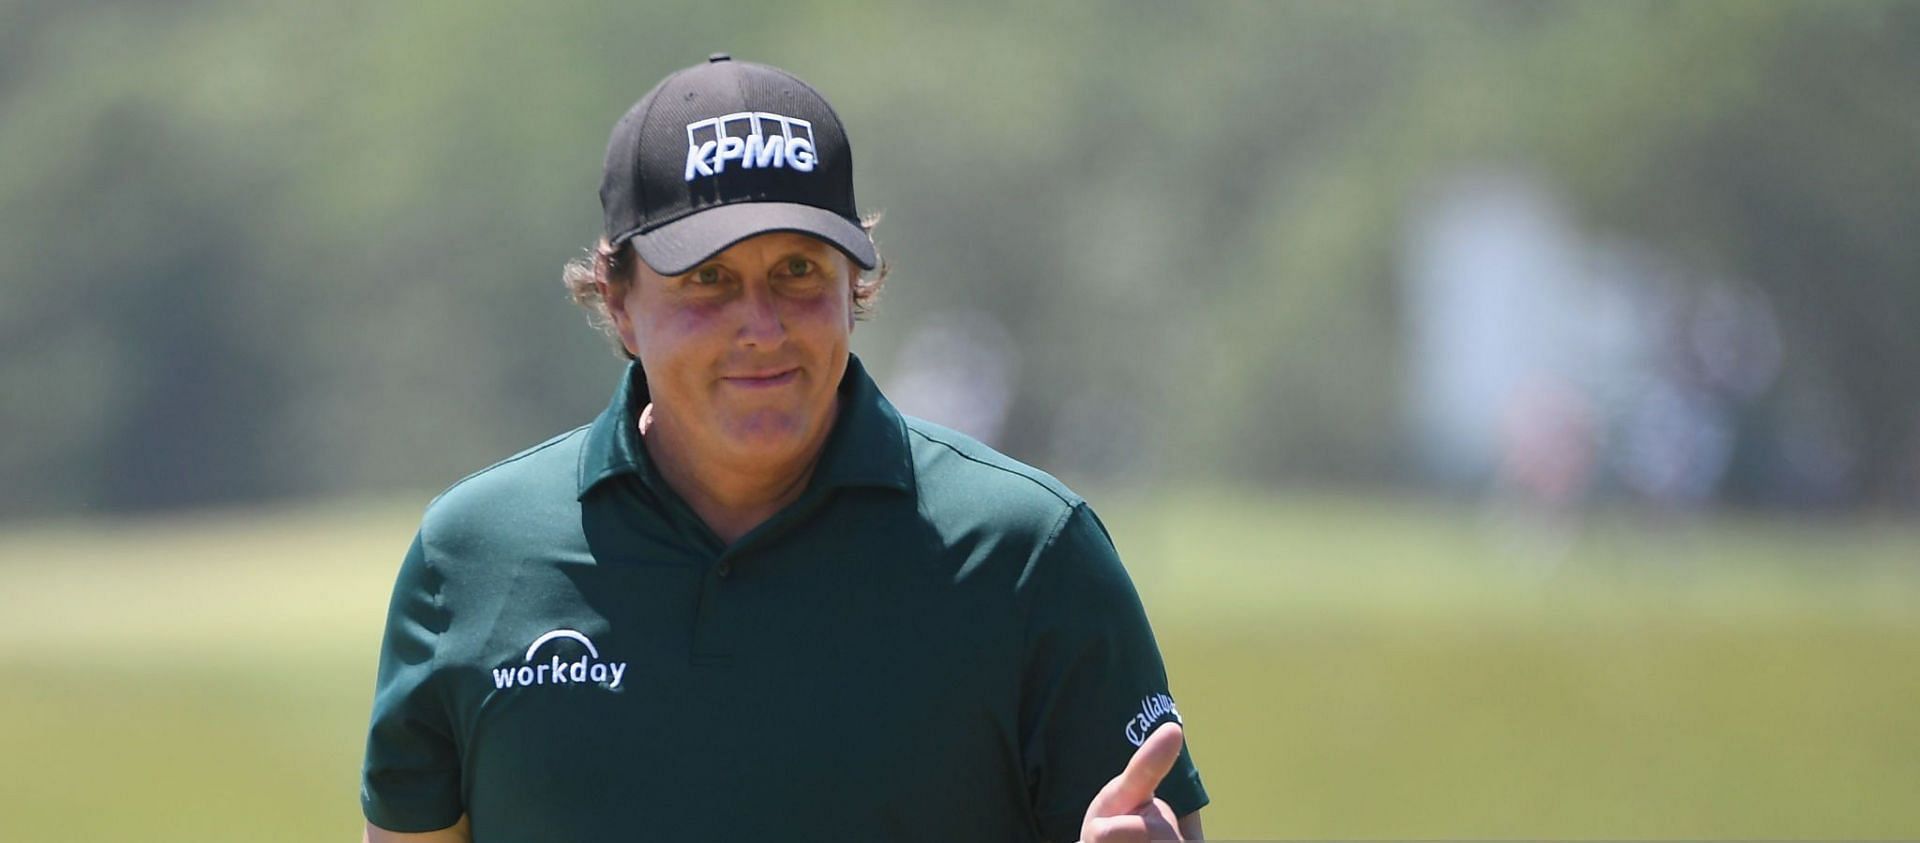 Phil Mickelson issued an apology over his controversial Saudi comments (Image via Ross Kinnaird/Getty Images)